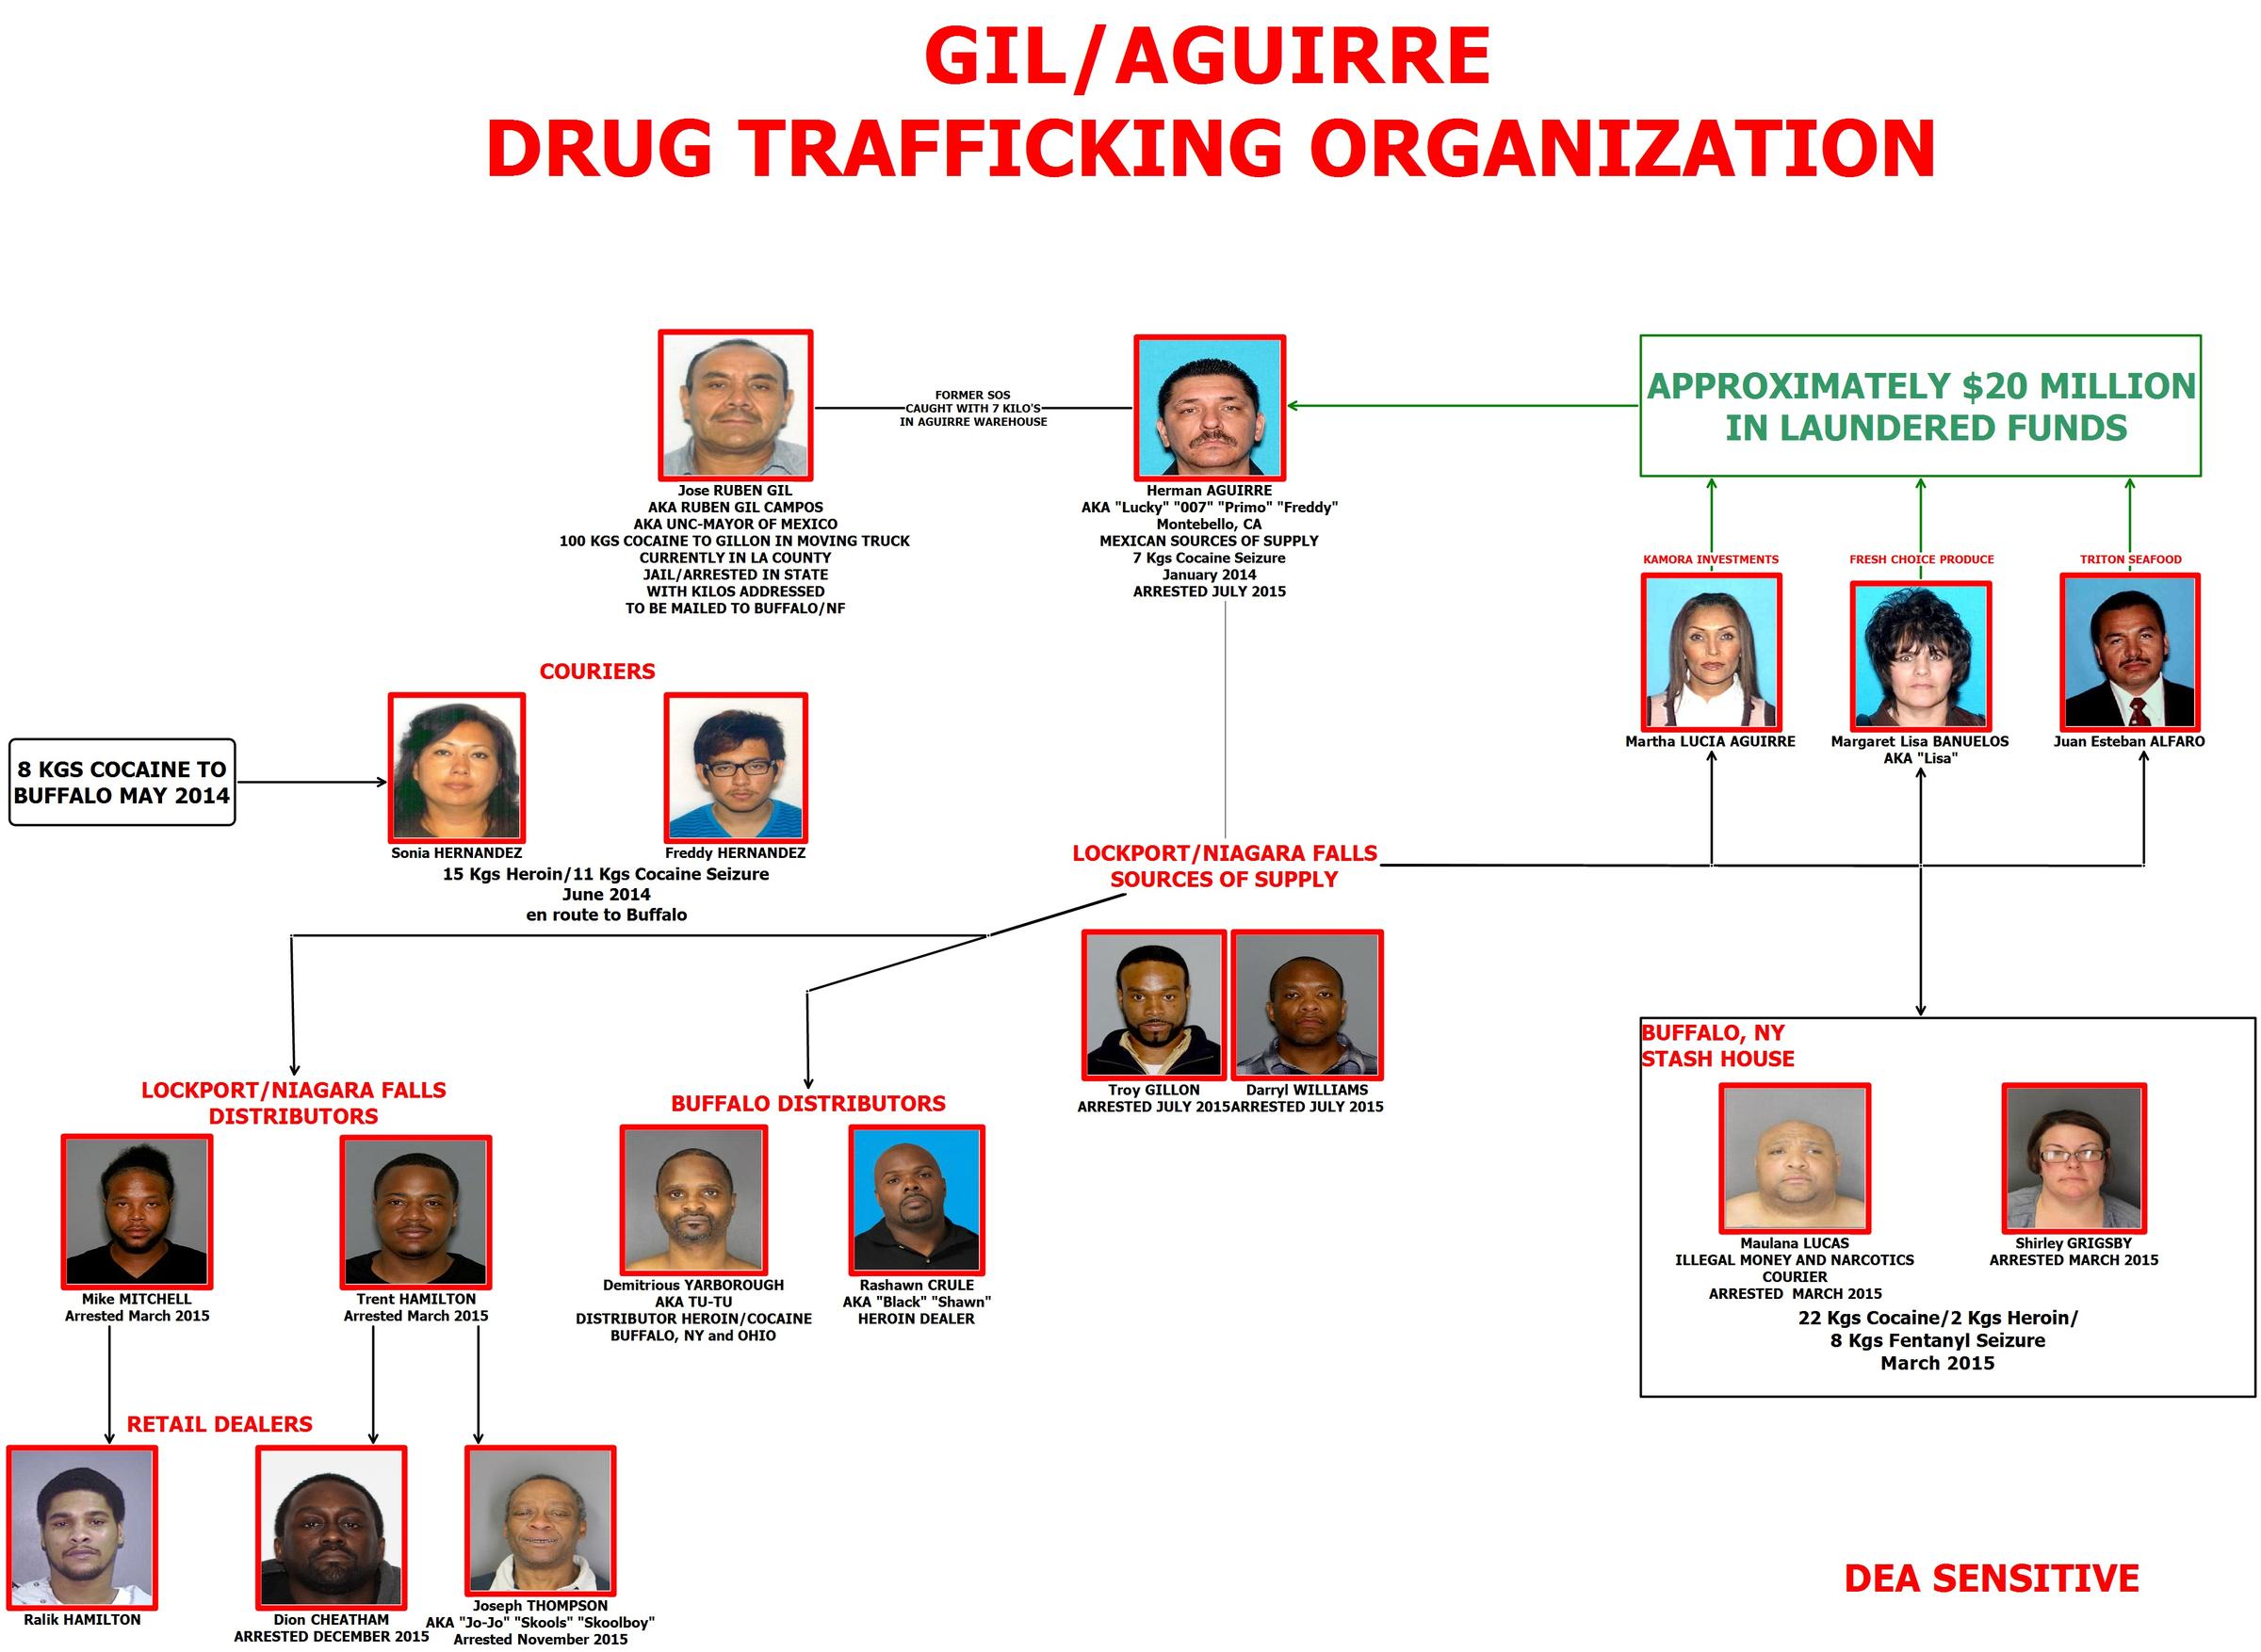 Massive drug trafficking operation to be prosecuted by WNY U.S